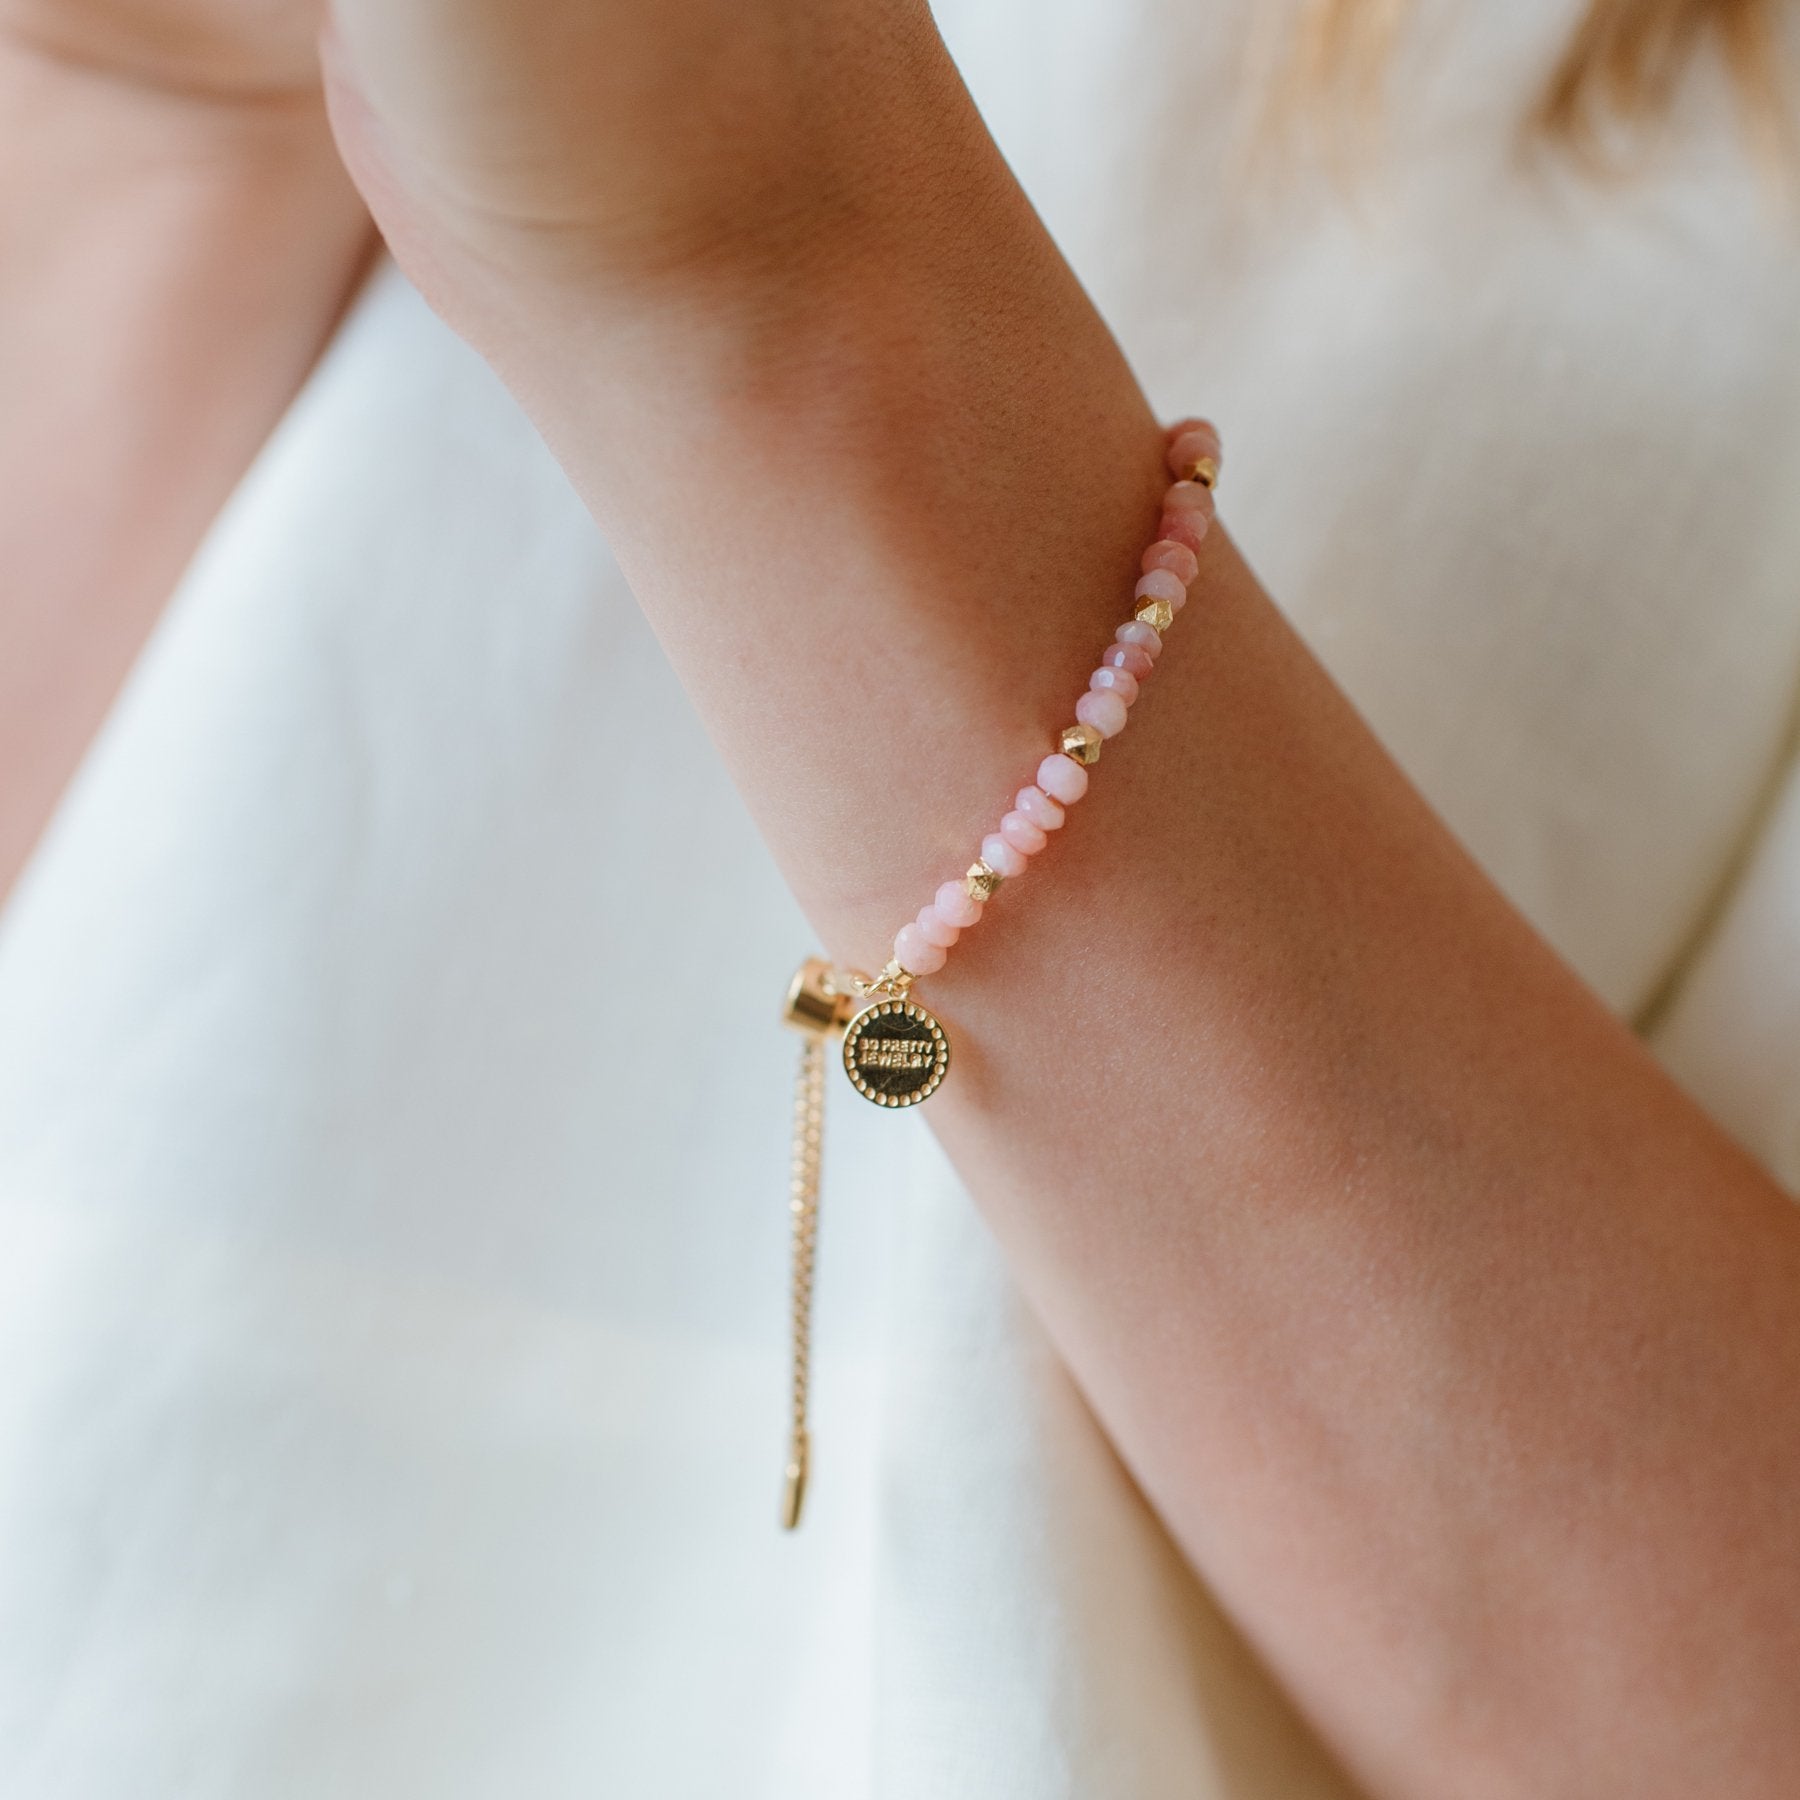 ICONIC ADJUSTABLE NUGGET BRACELET - PINK OPAL & GOLD - SO PRETTY CARA COTTER